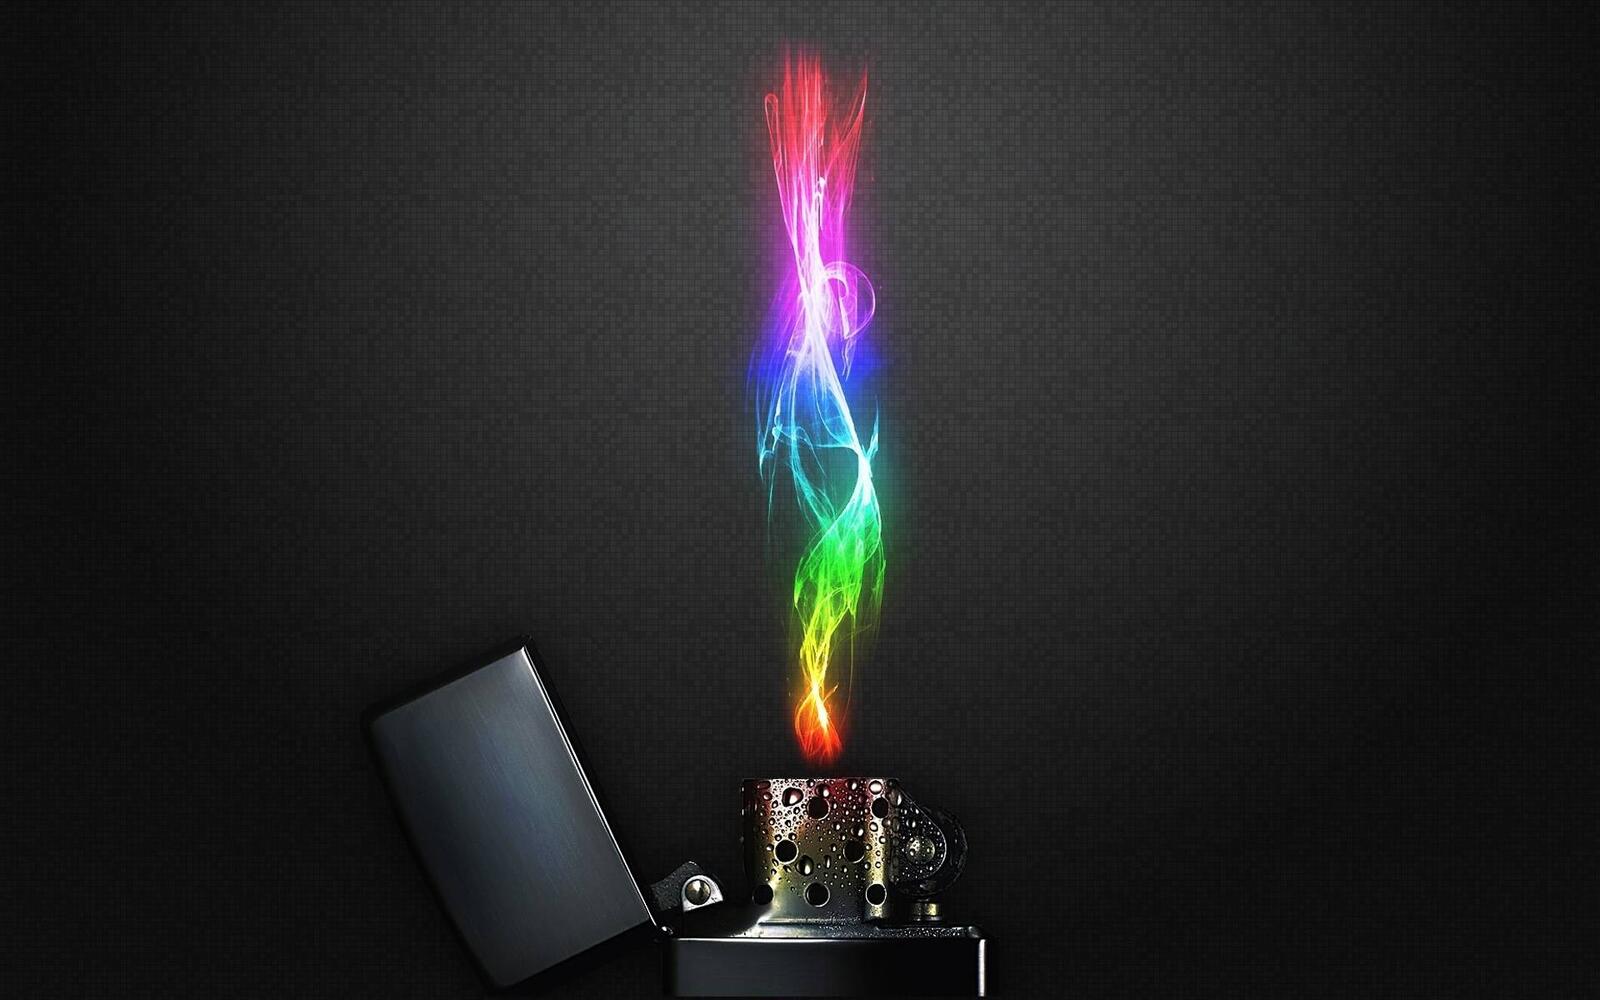 Wallpapers zippo lighter colored flame on the desktop